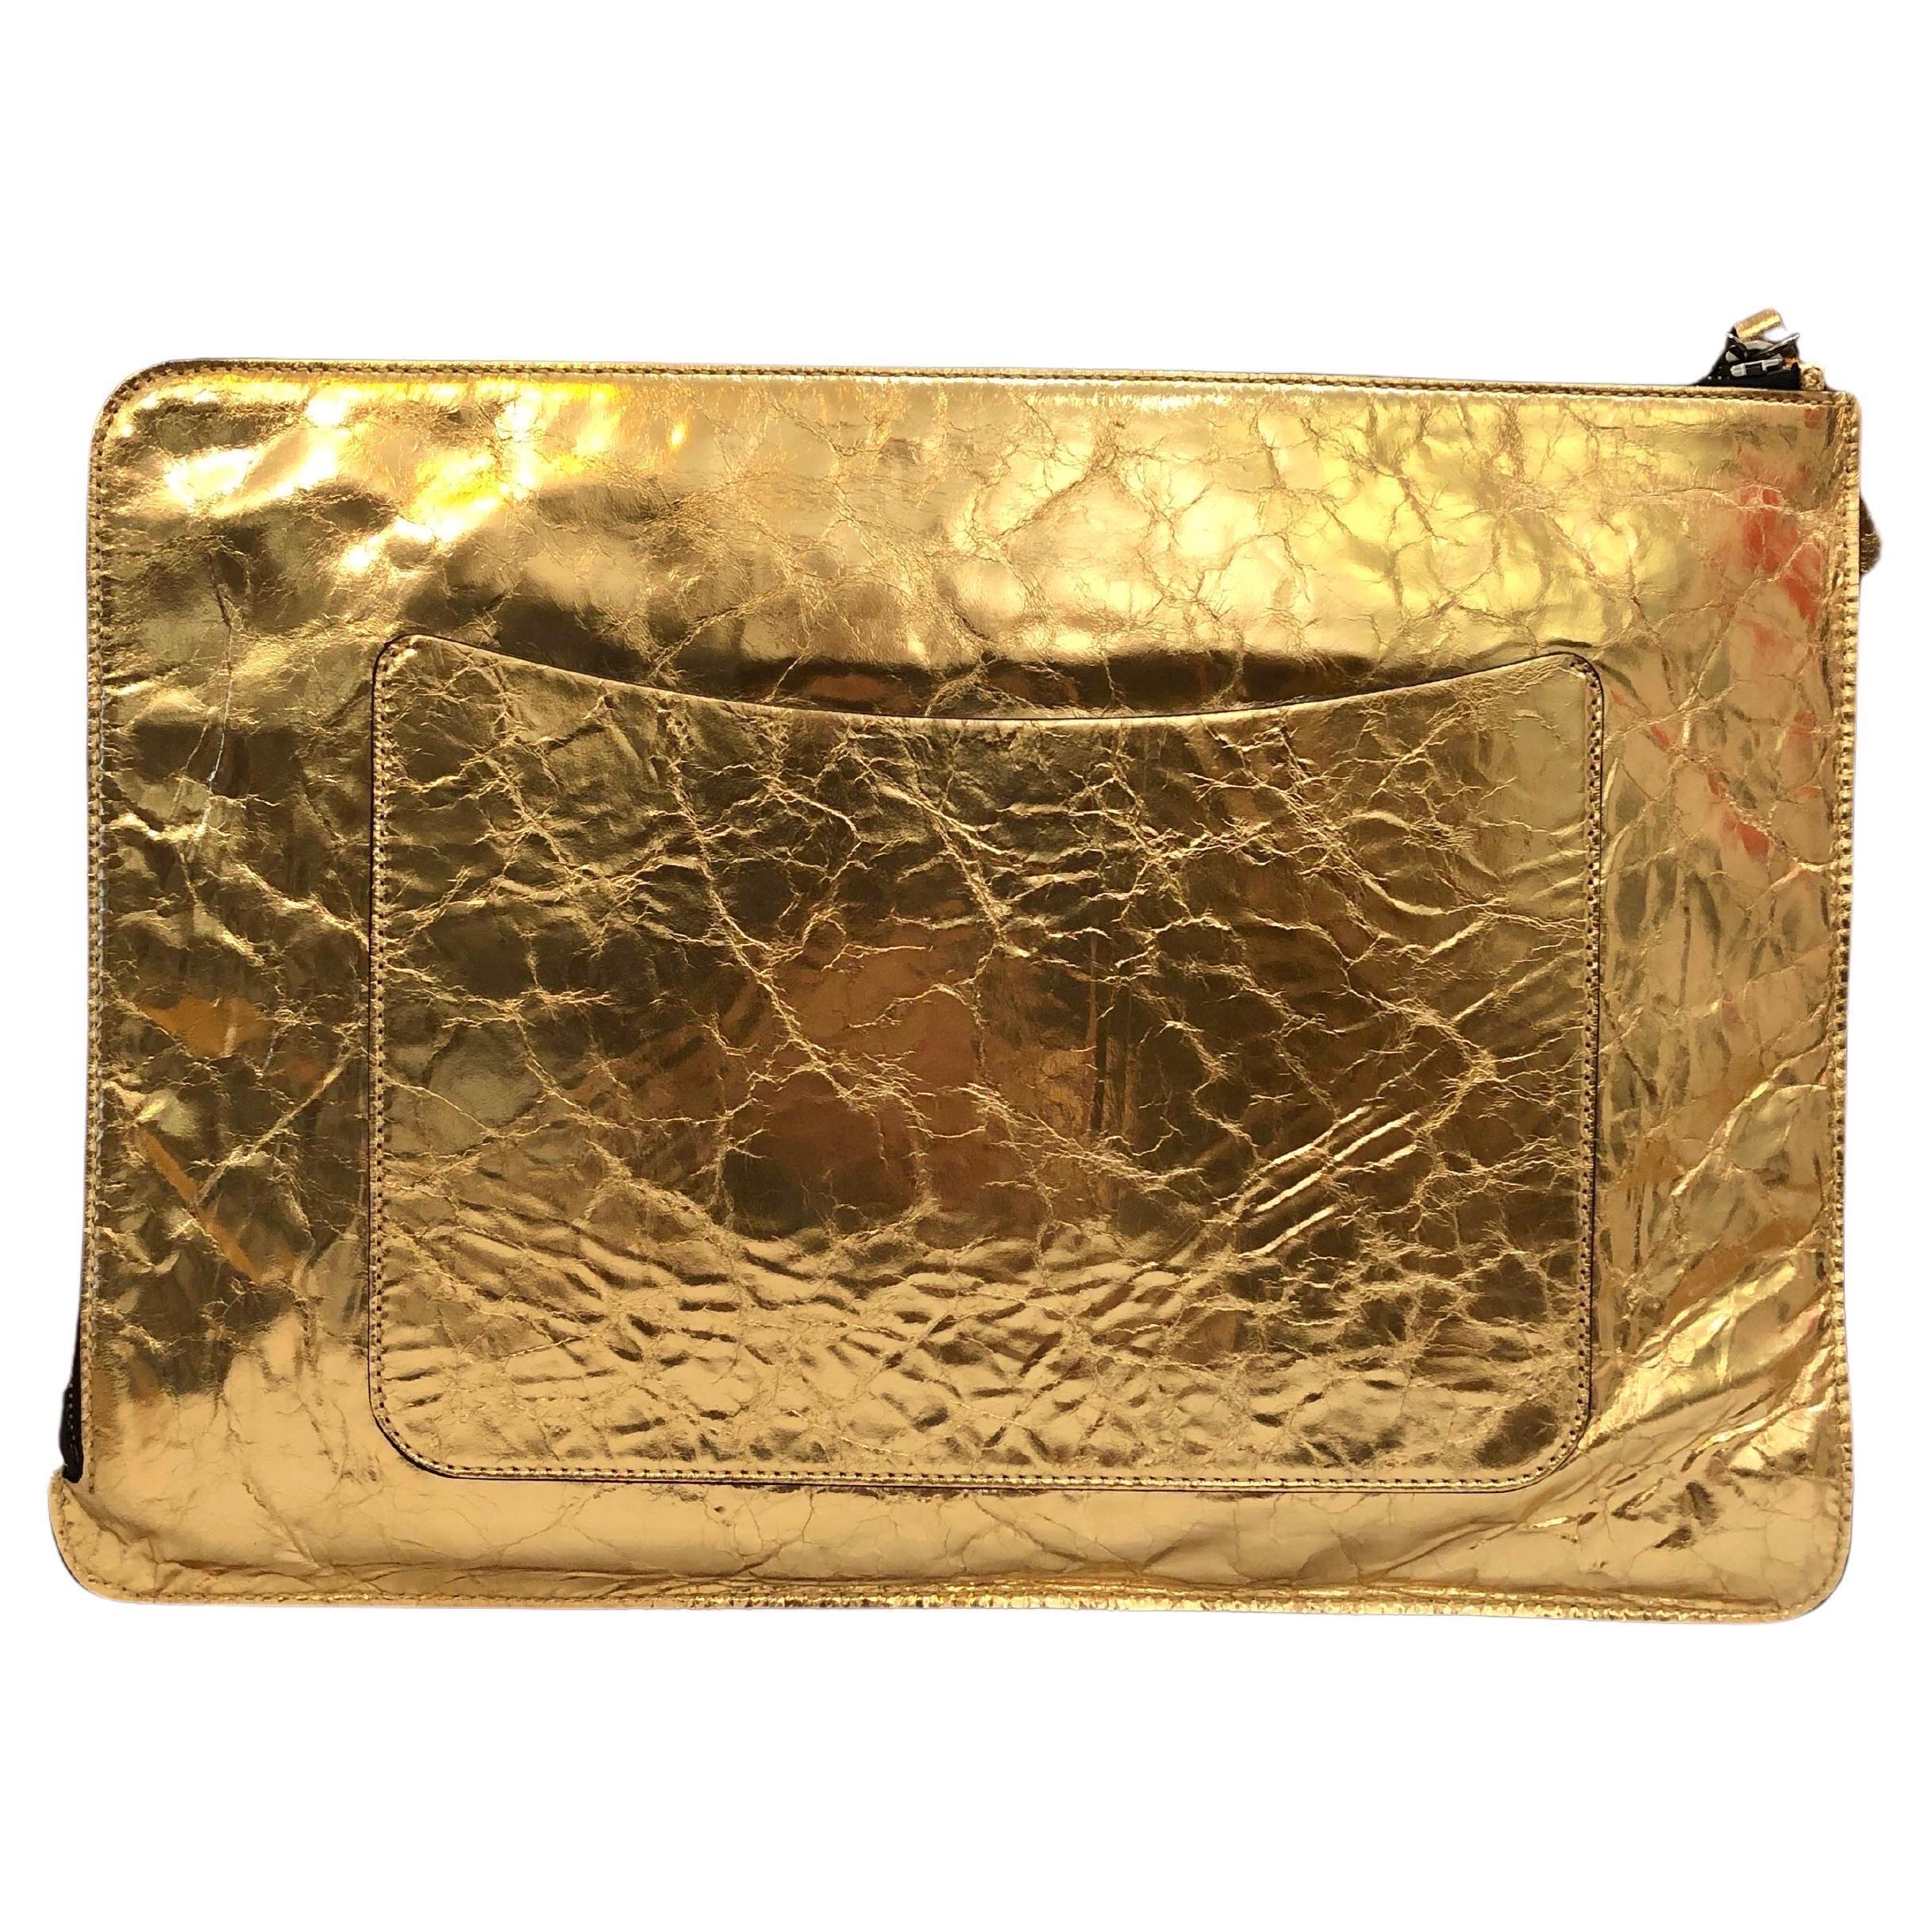 2015 Spring Runway CHANEL Metallic Gold Toned Distressed Leather Clutch Bag  In Excellent Condition For Sale In Bangkok, TH